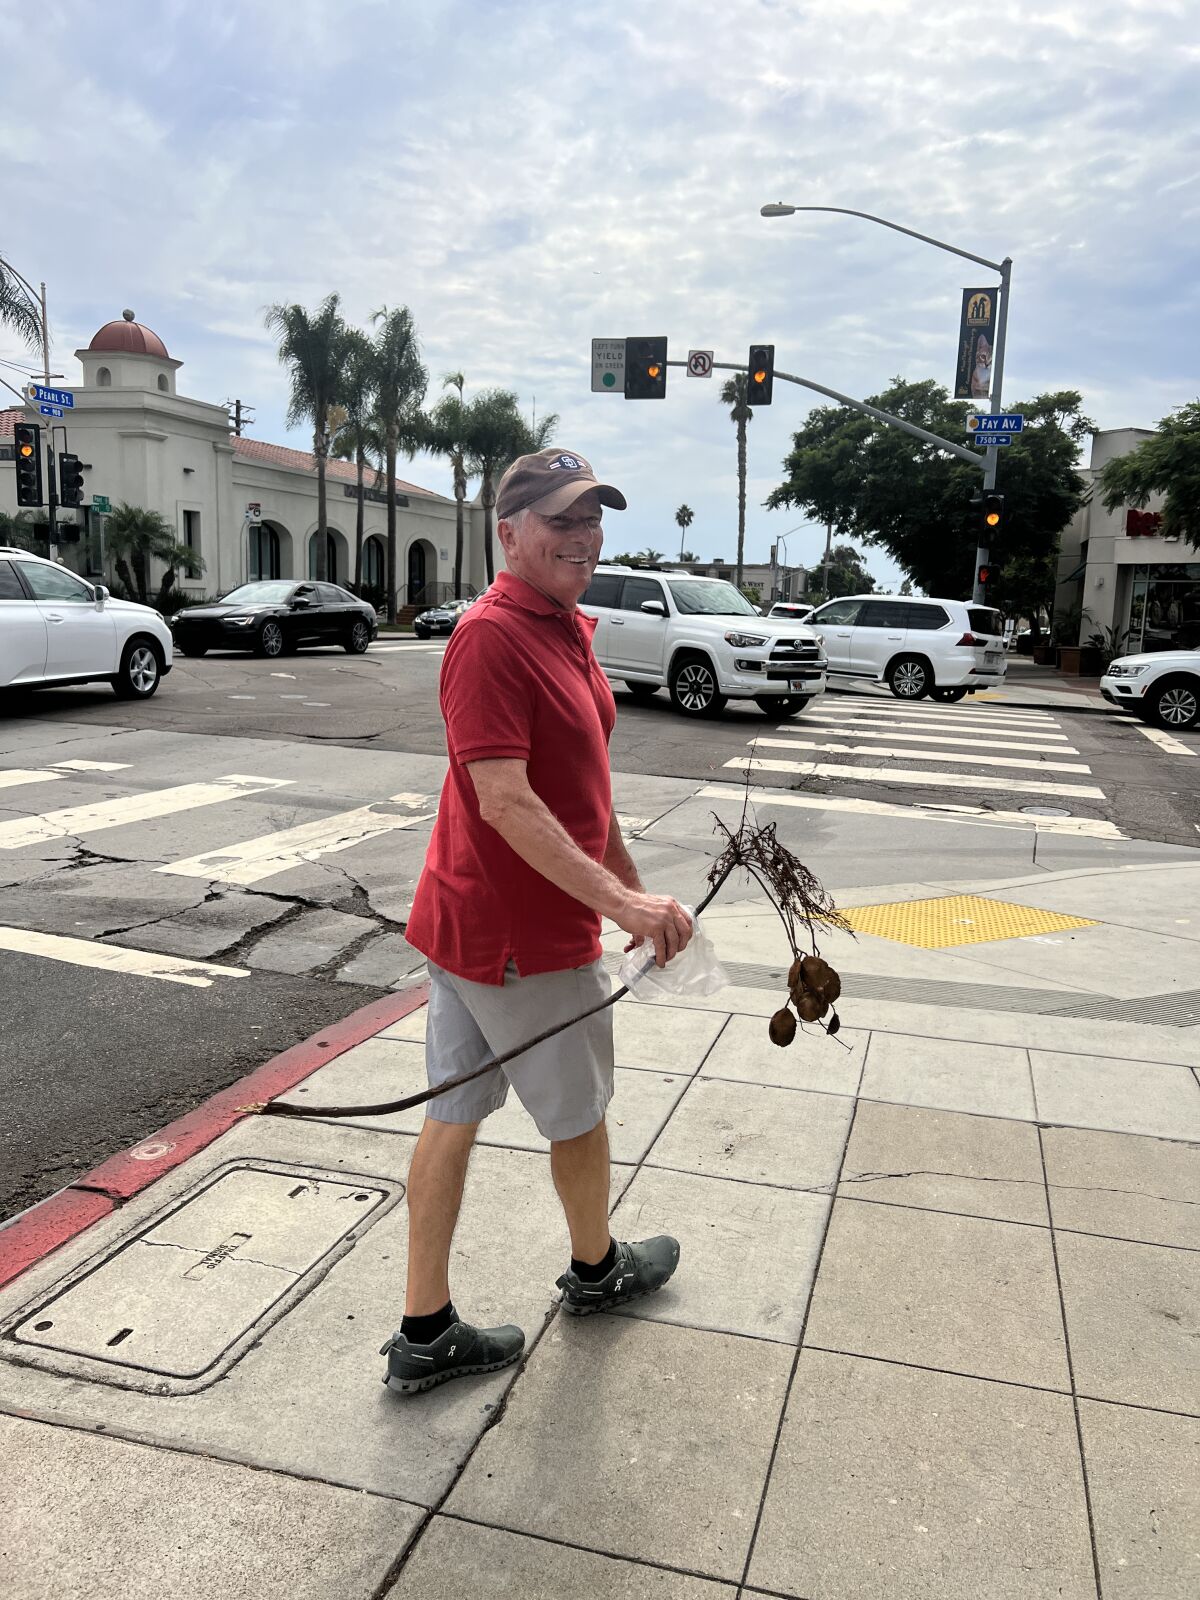 Though Enhance La Jolla and the MAD make daily efforts to clean The Village, Ed Witt says they can't keep up.